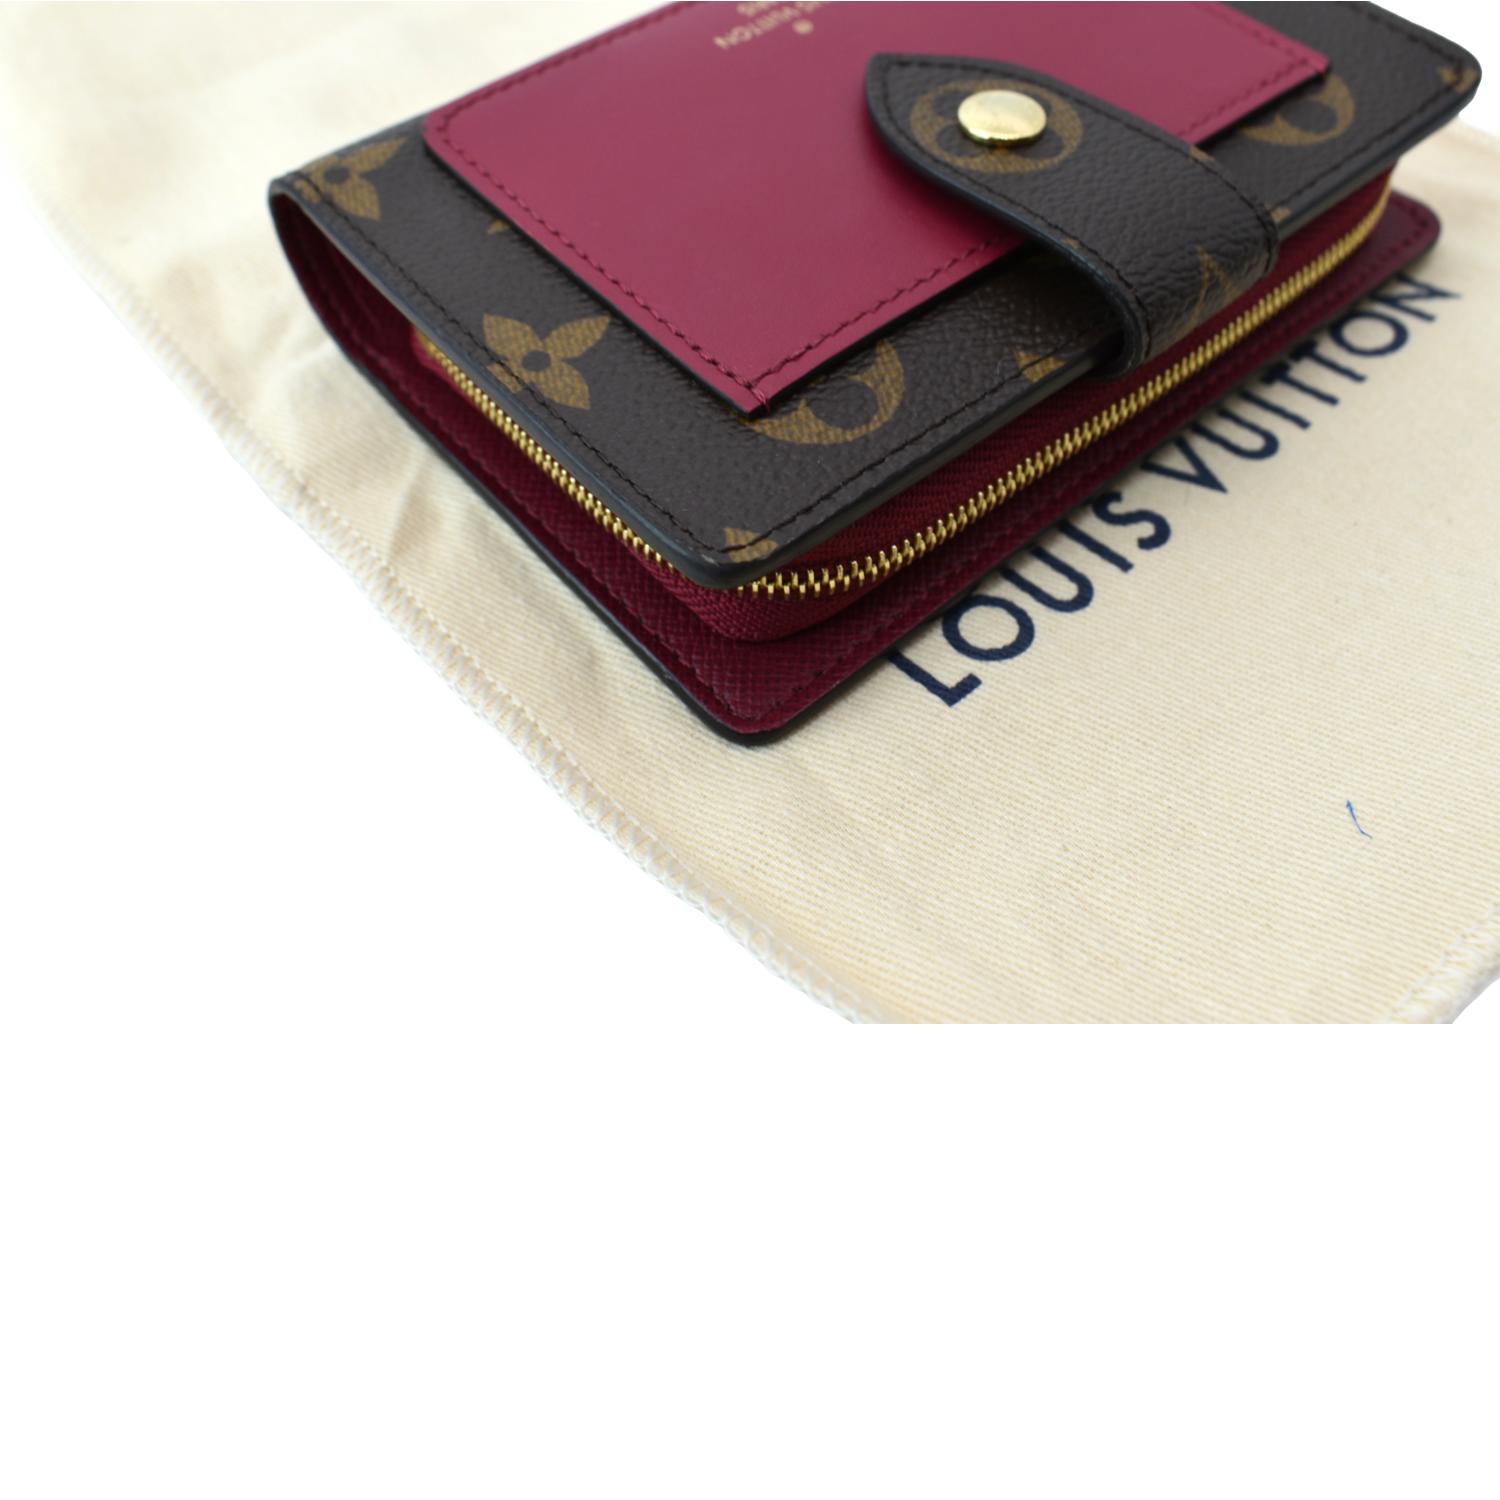 pre owned louis vuittons wallet